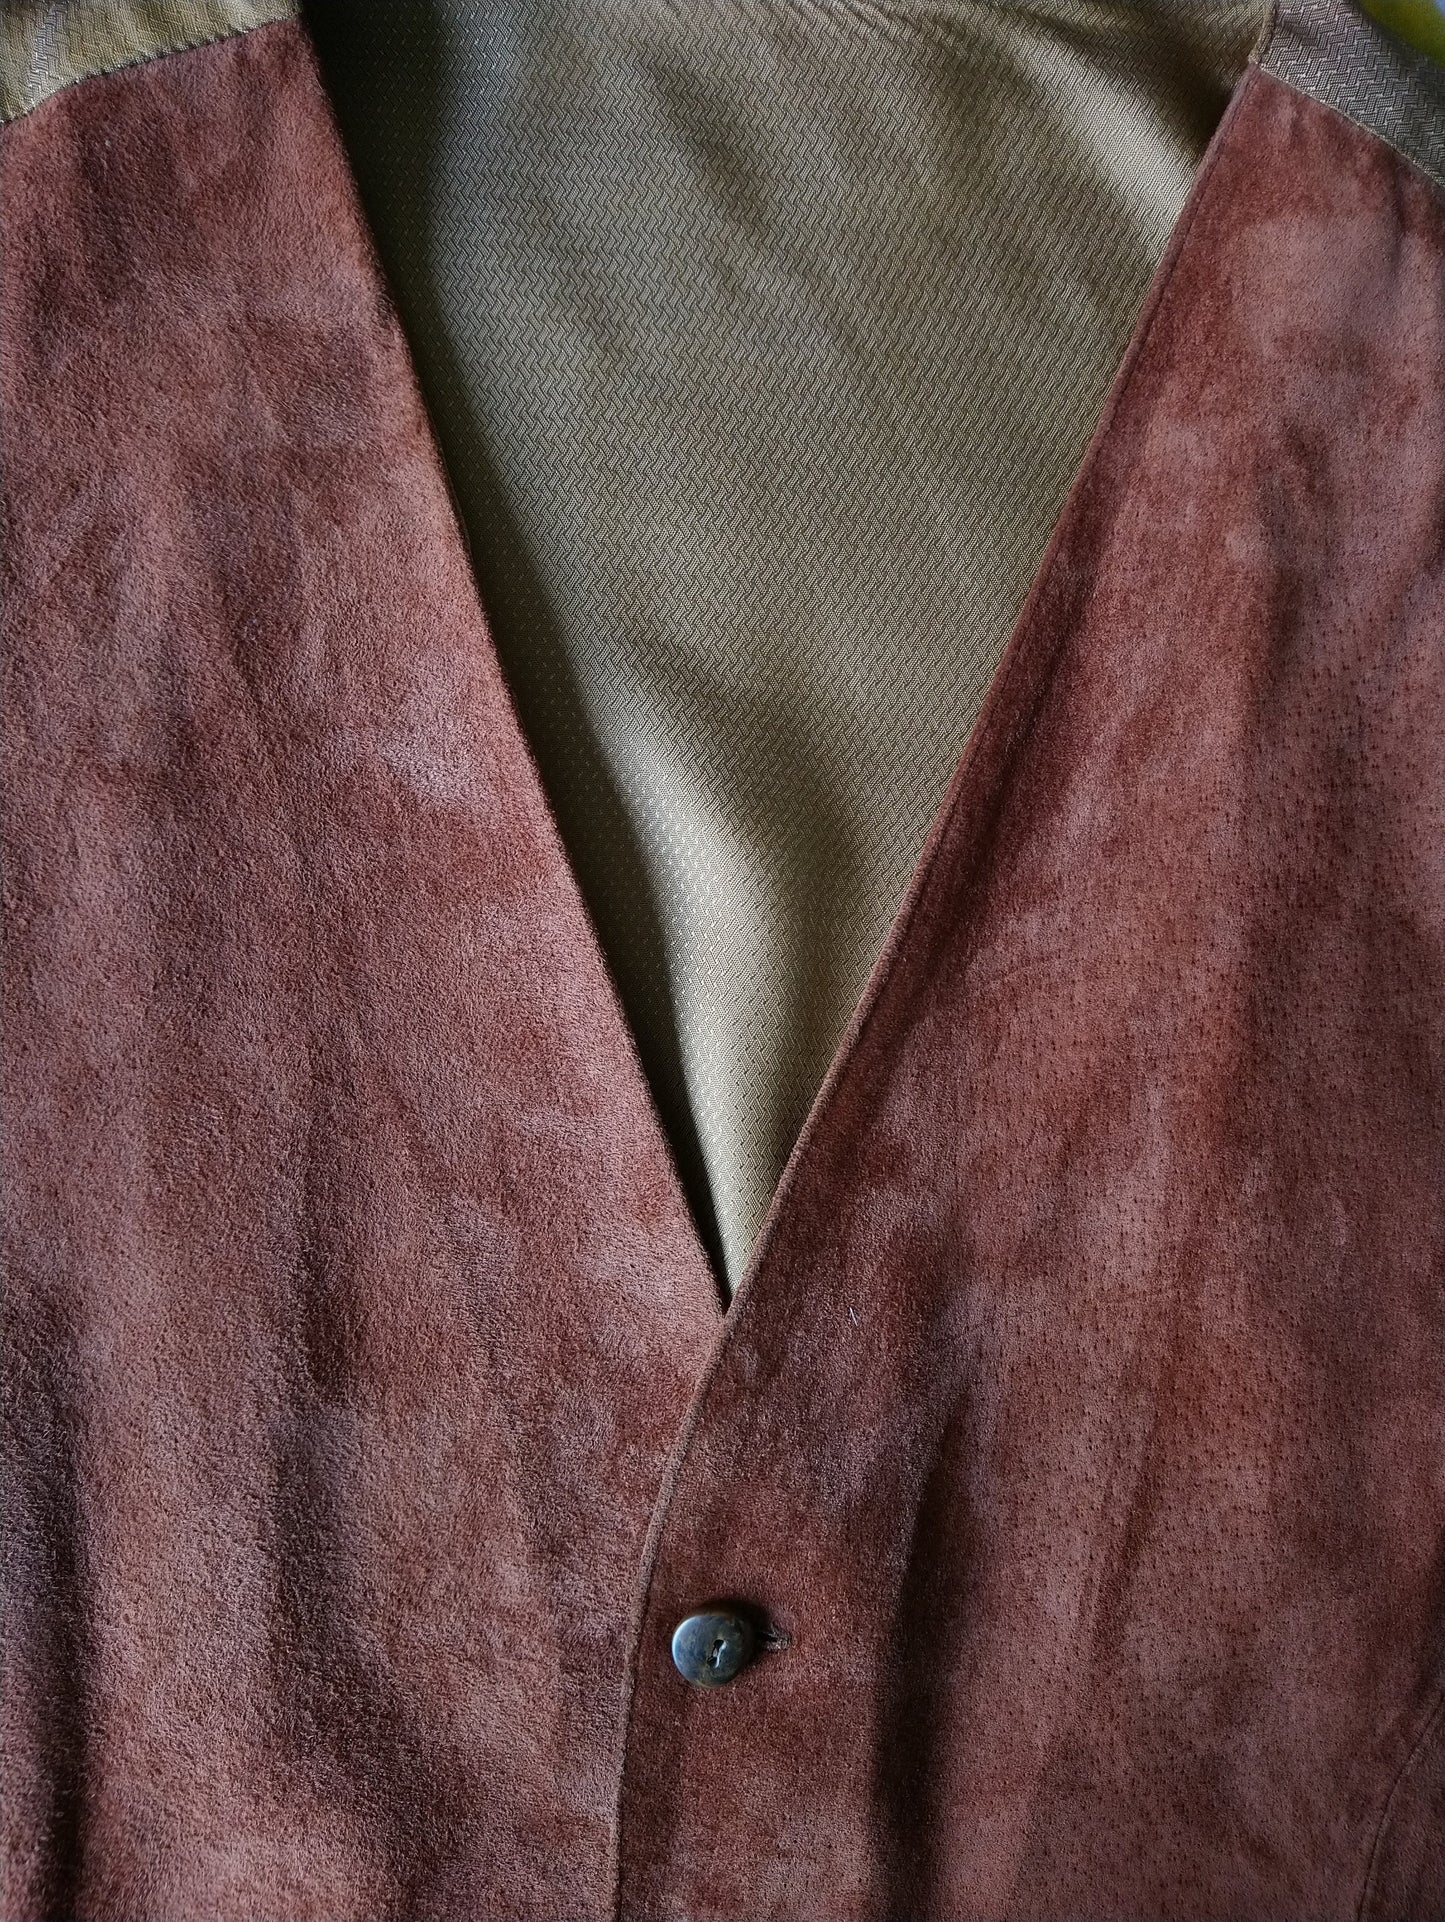 Suede / leather waistcoat. Brown colored. Size L. #311.